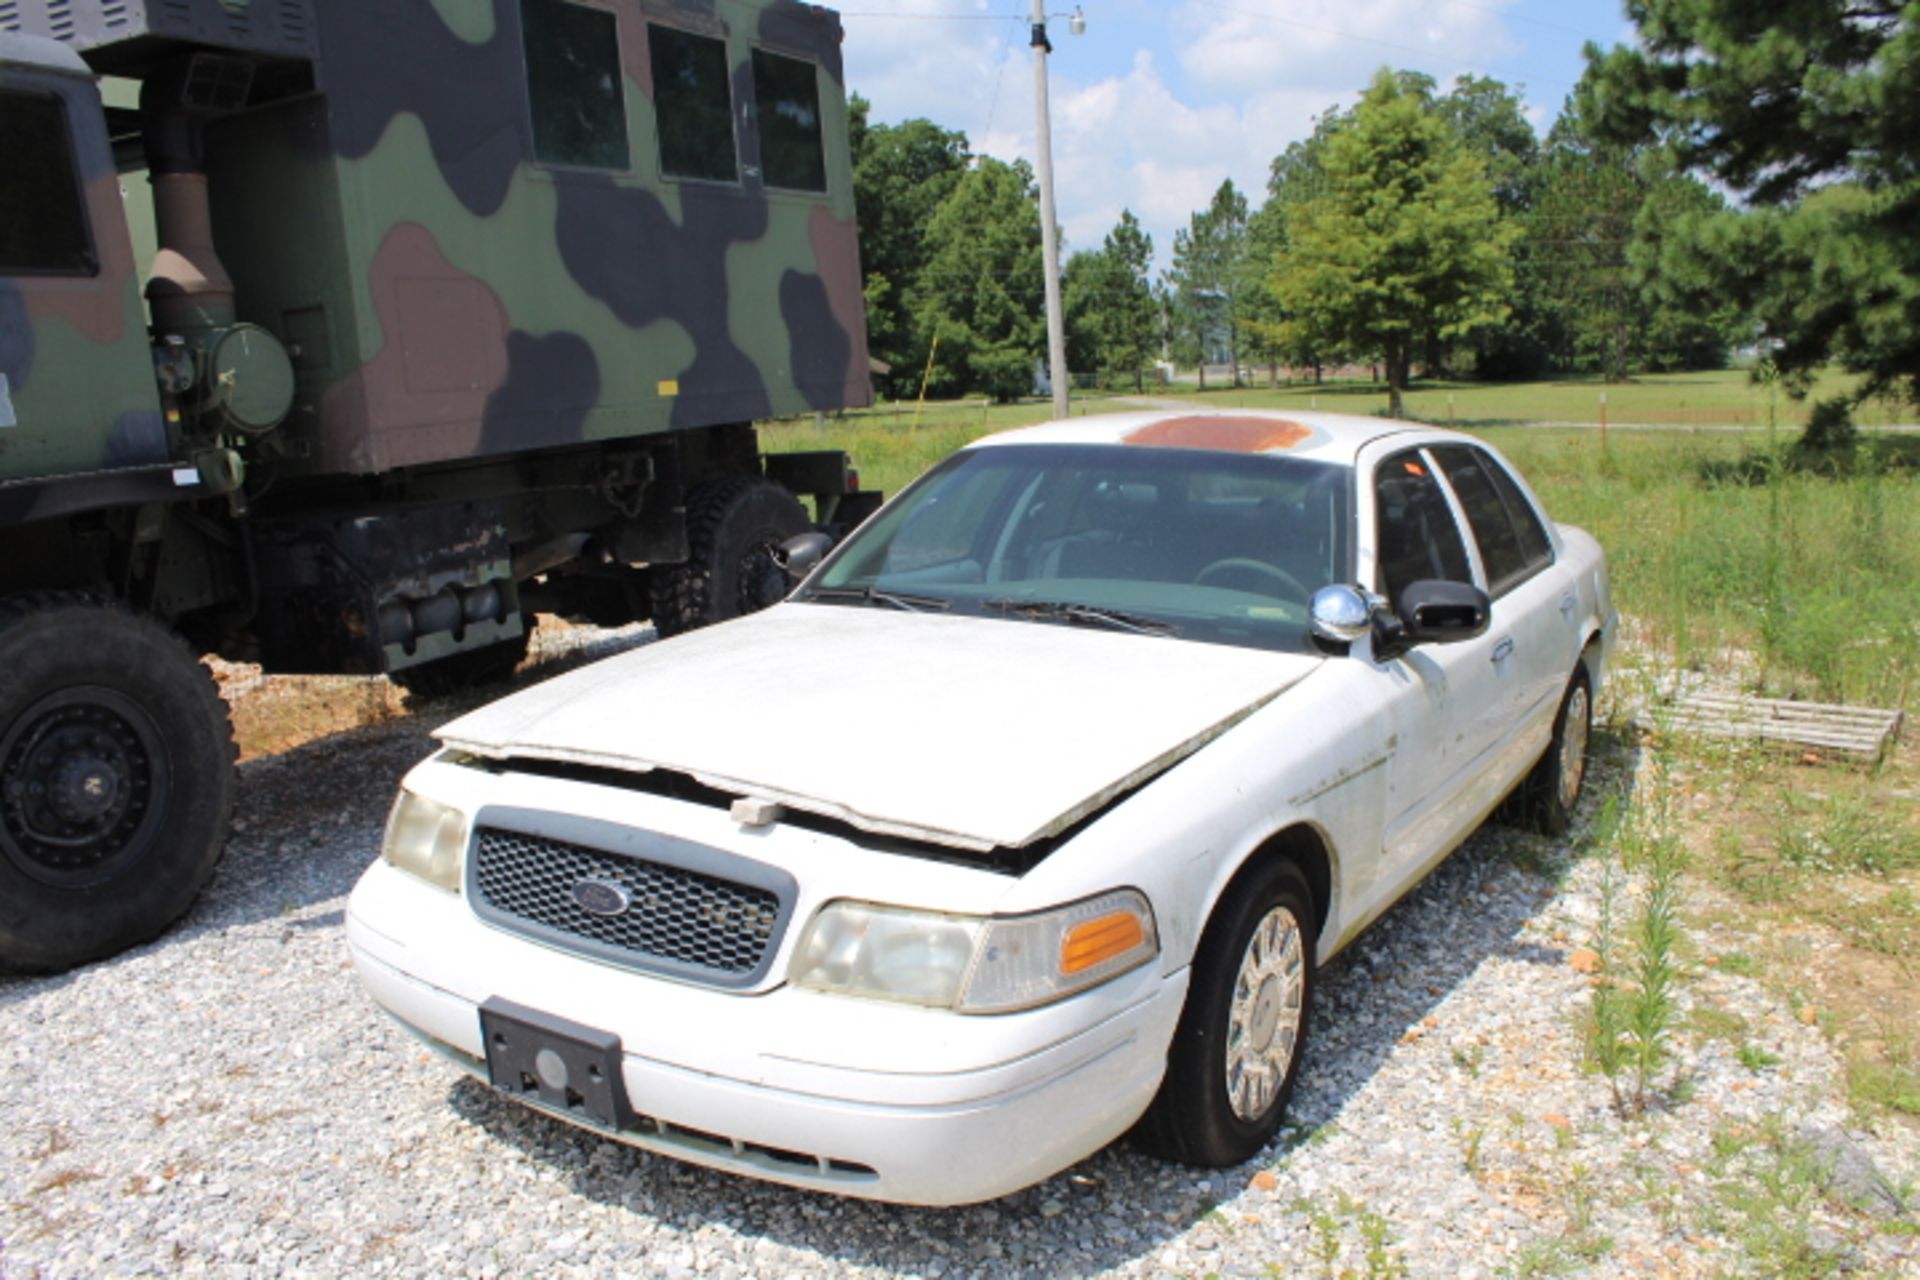 2003 FORD CROWN VIC, NEEDS COIL PACK, 143,582 MILES.